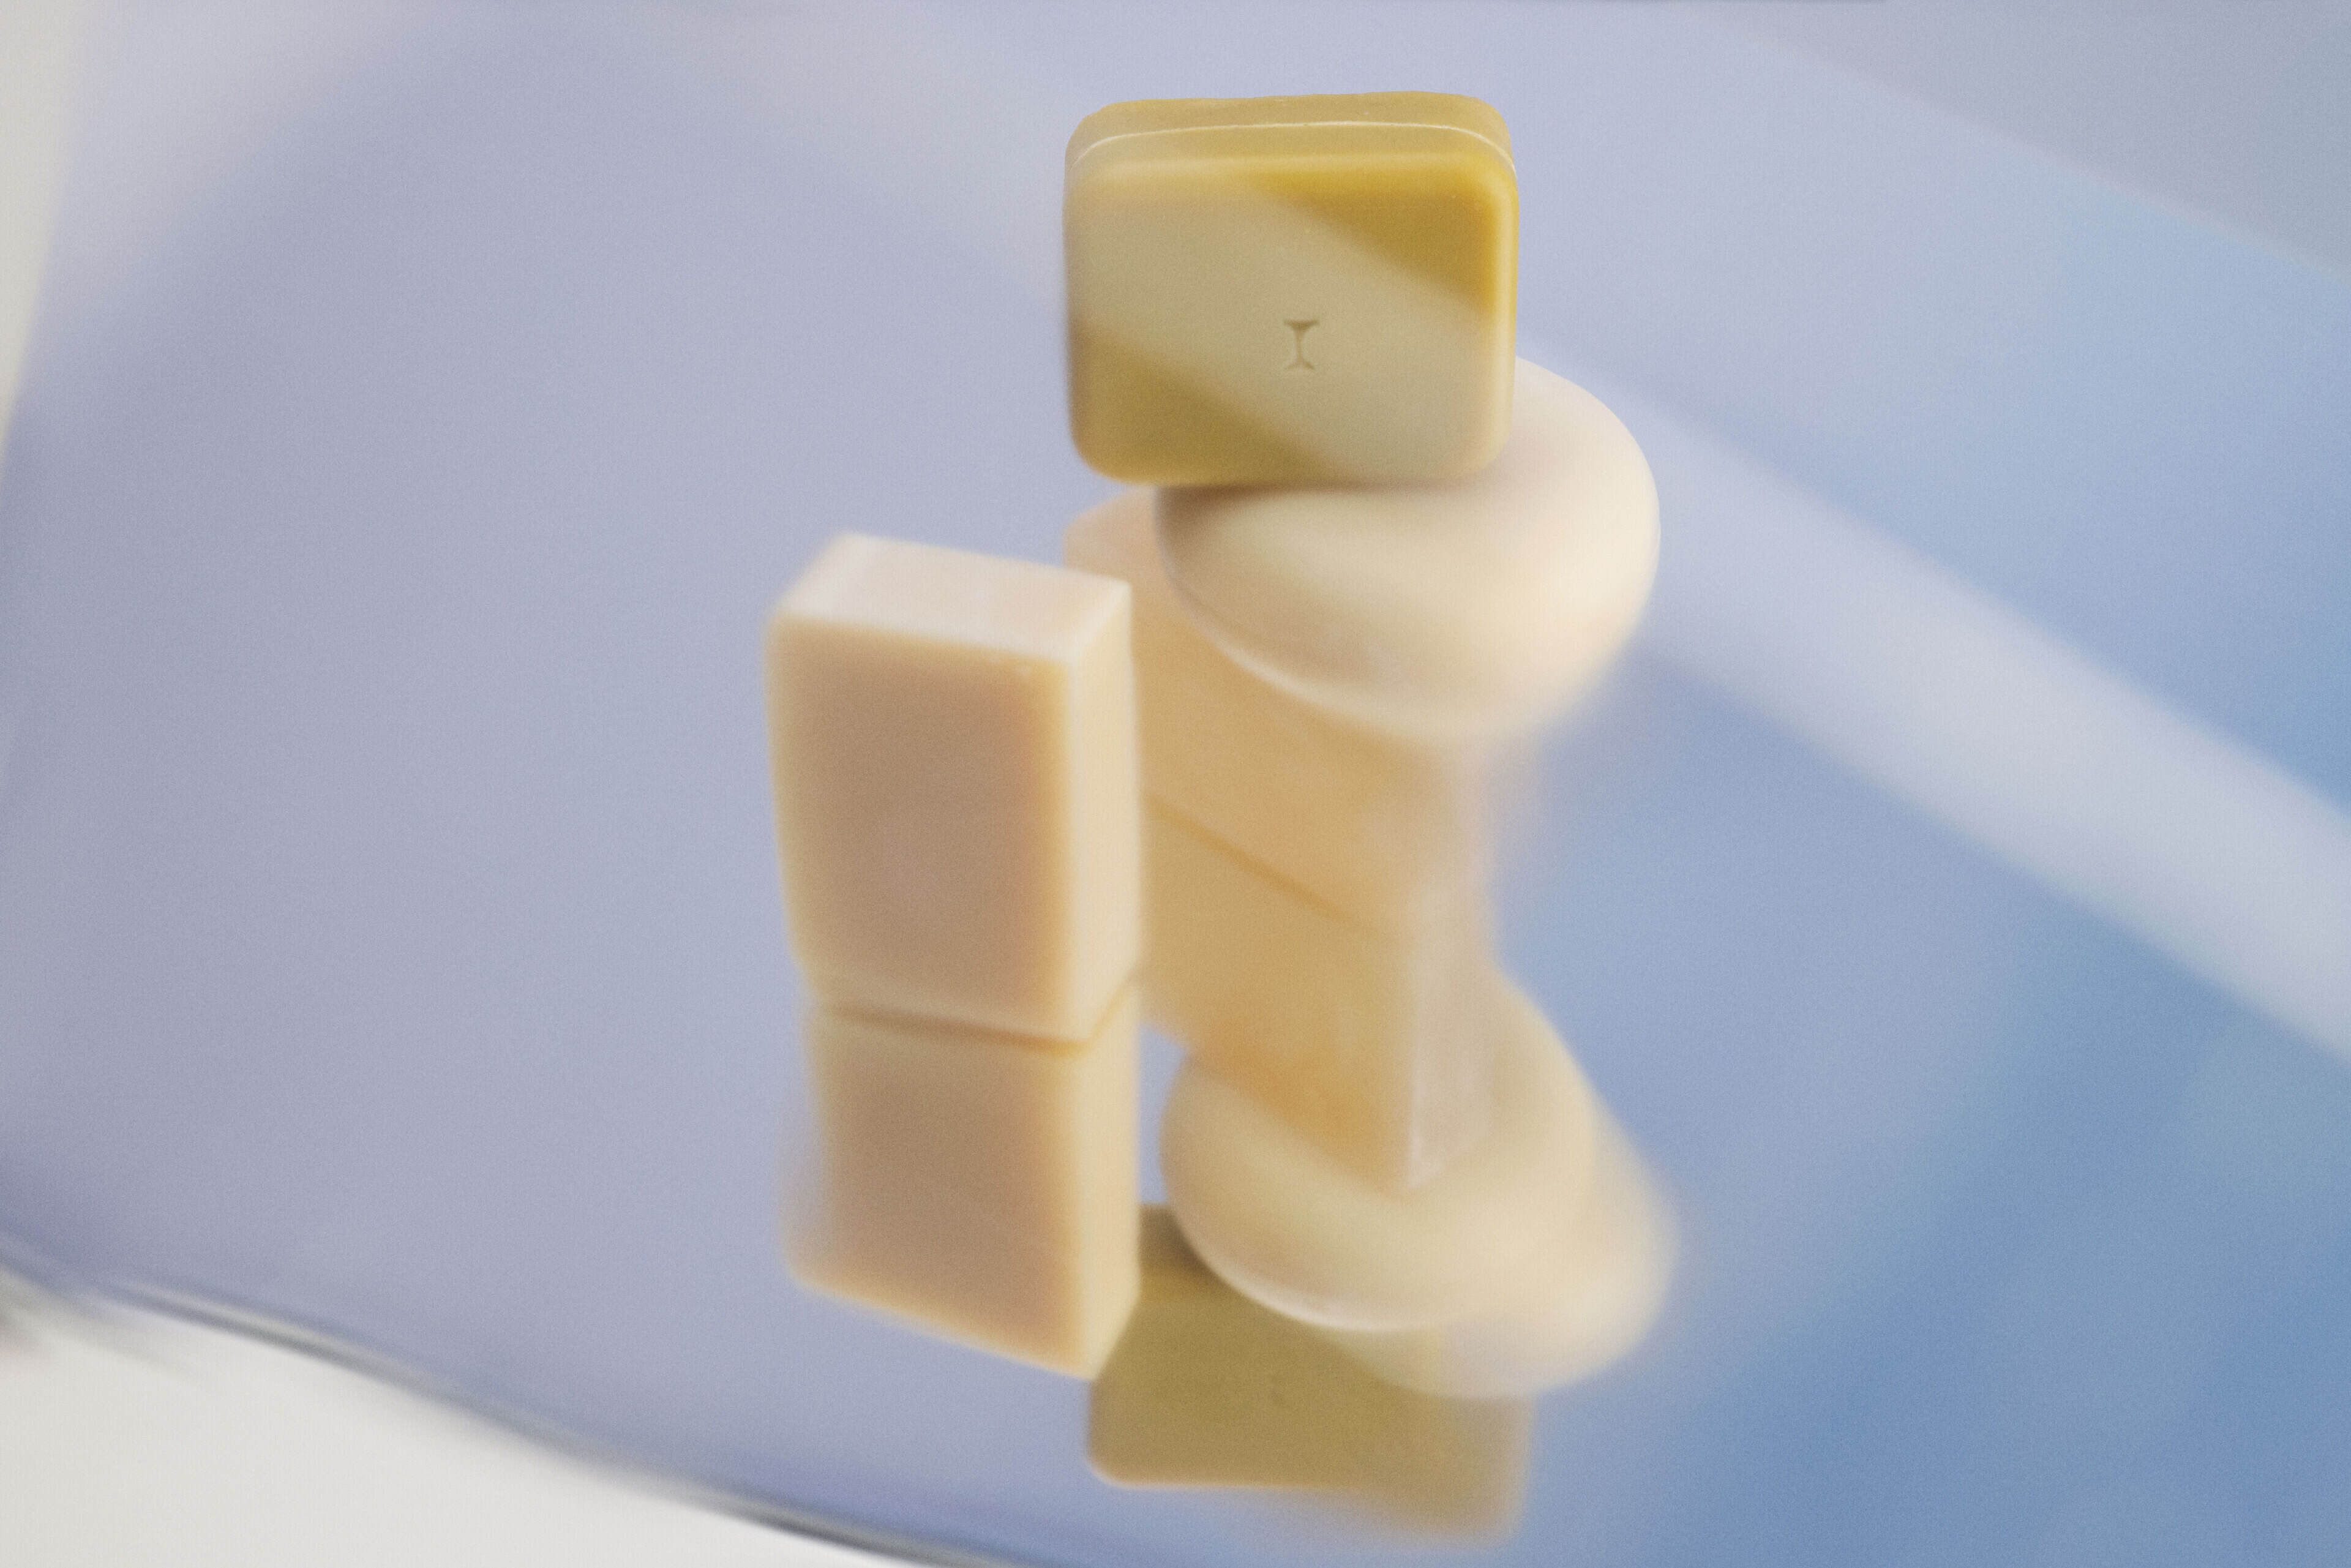 A pile of different shaped soap bars